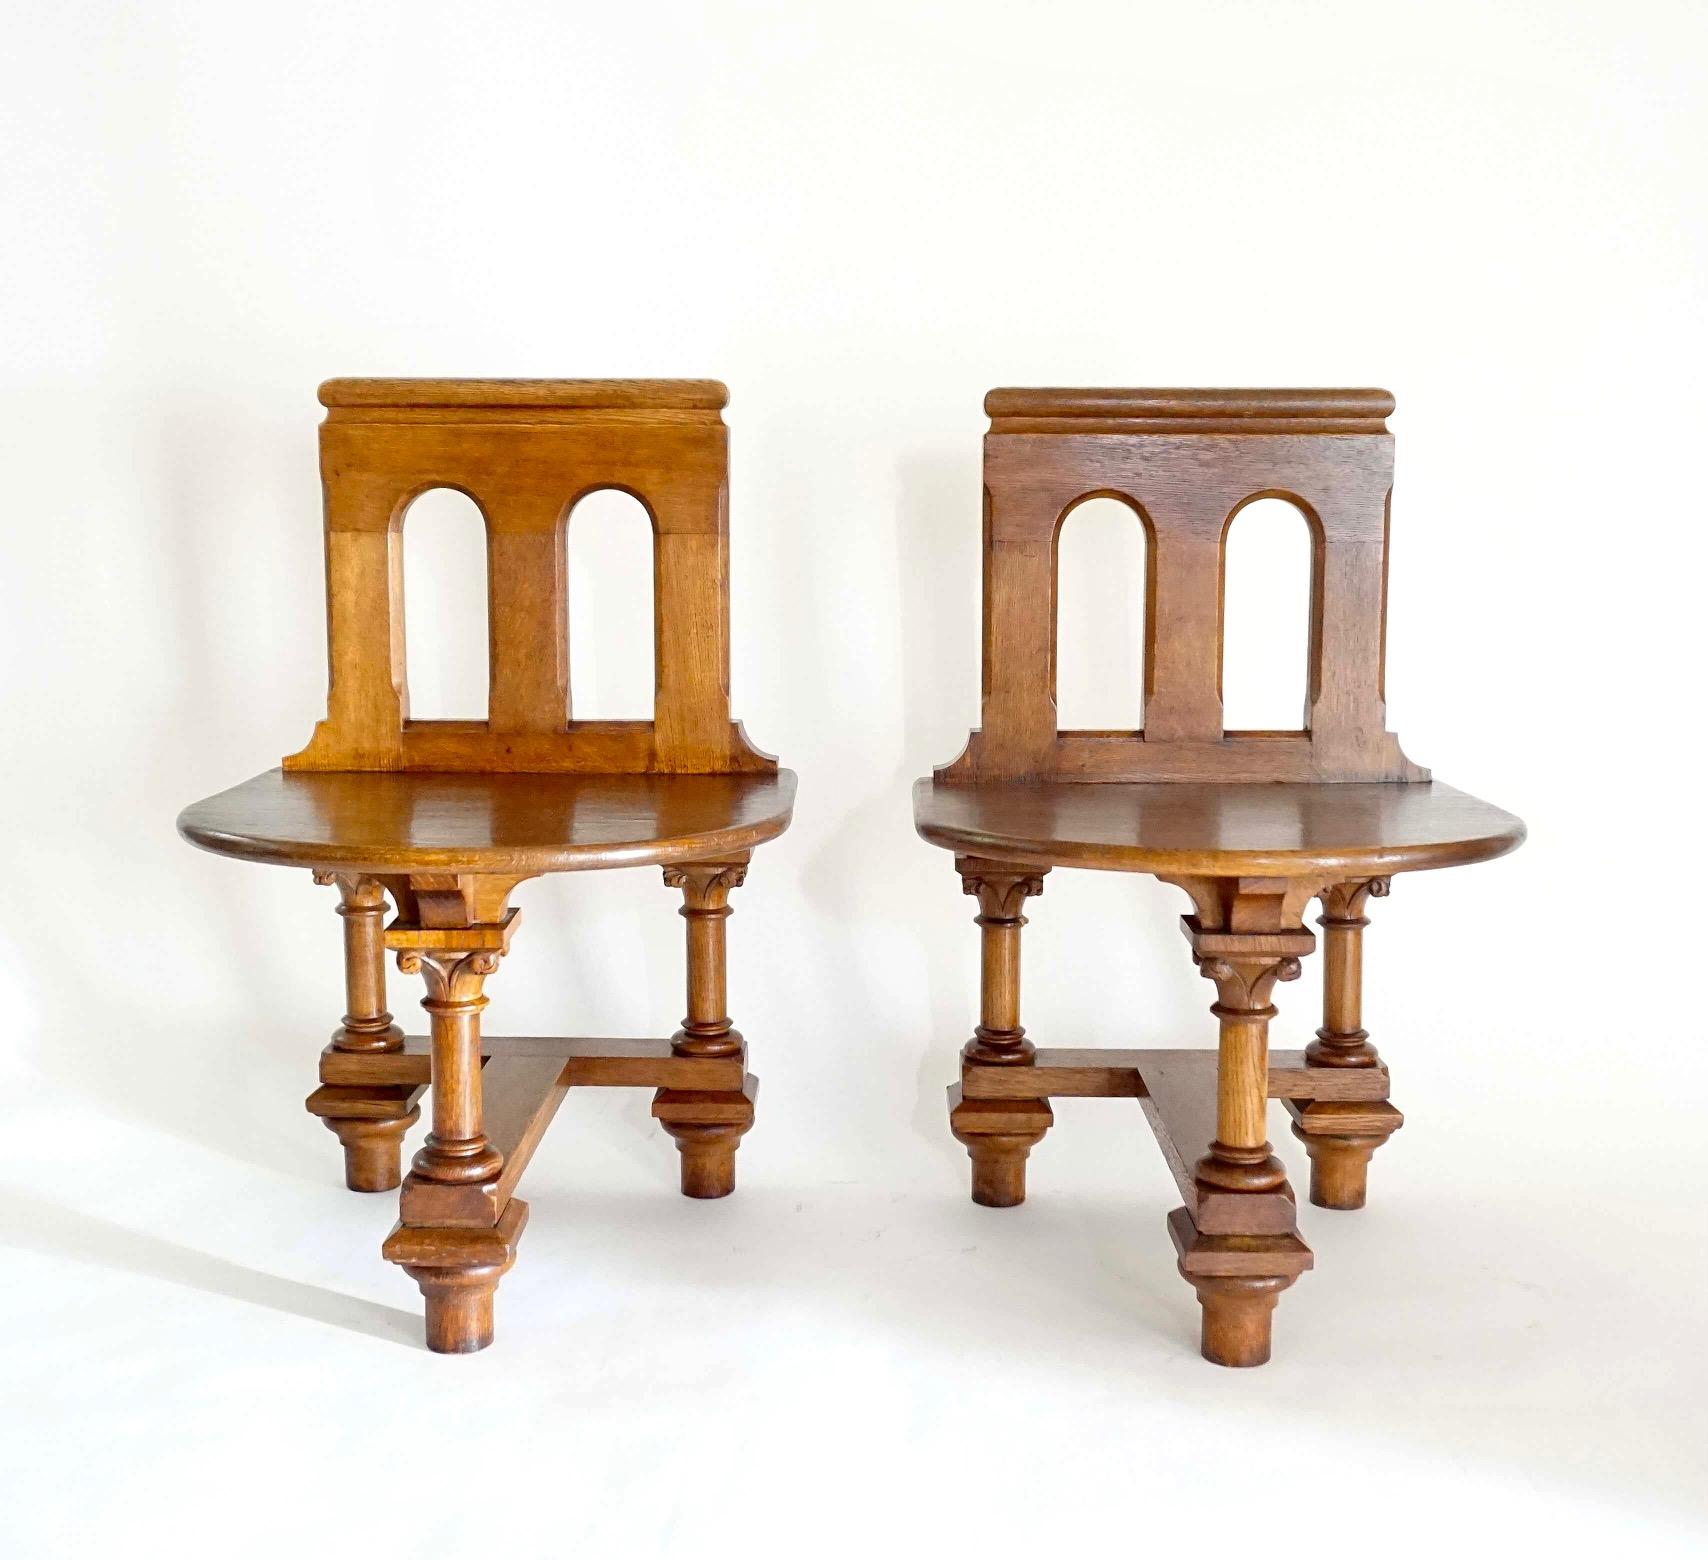 A highly unusual pair of late 19th/early 20th century French Norman Romanesque Revival hall seats or chairs of architectural form and solid oak construction having double arch carved backs above deep D-form seats supported by bracketed T-form